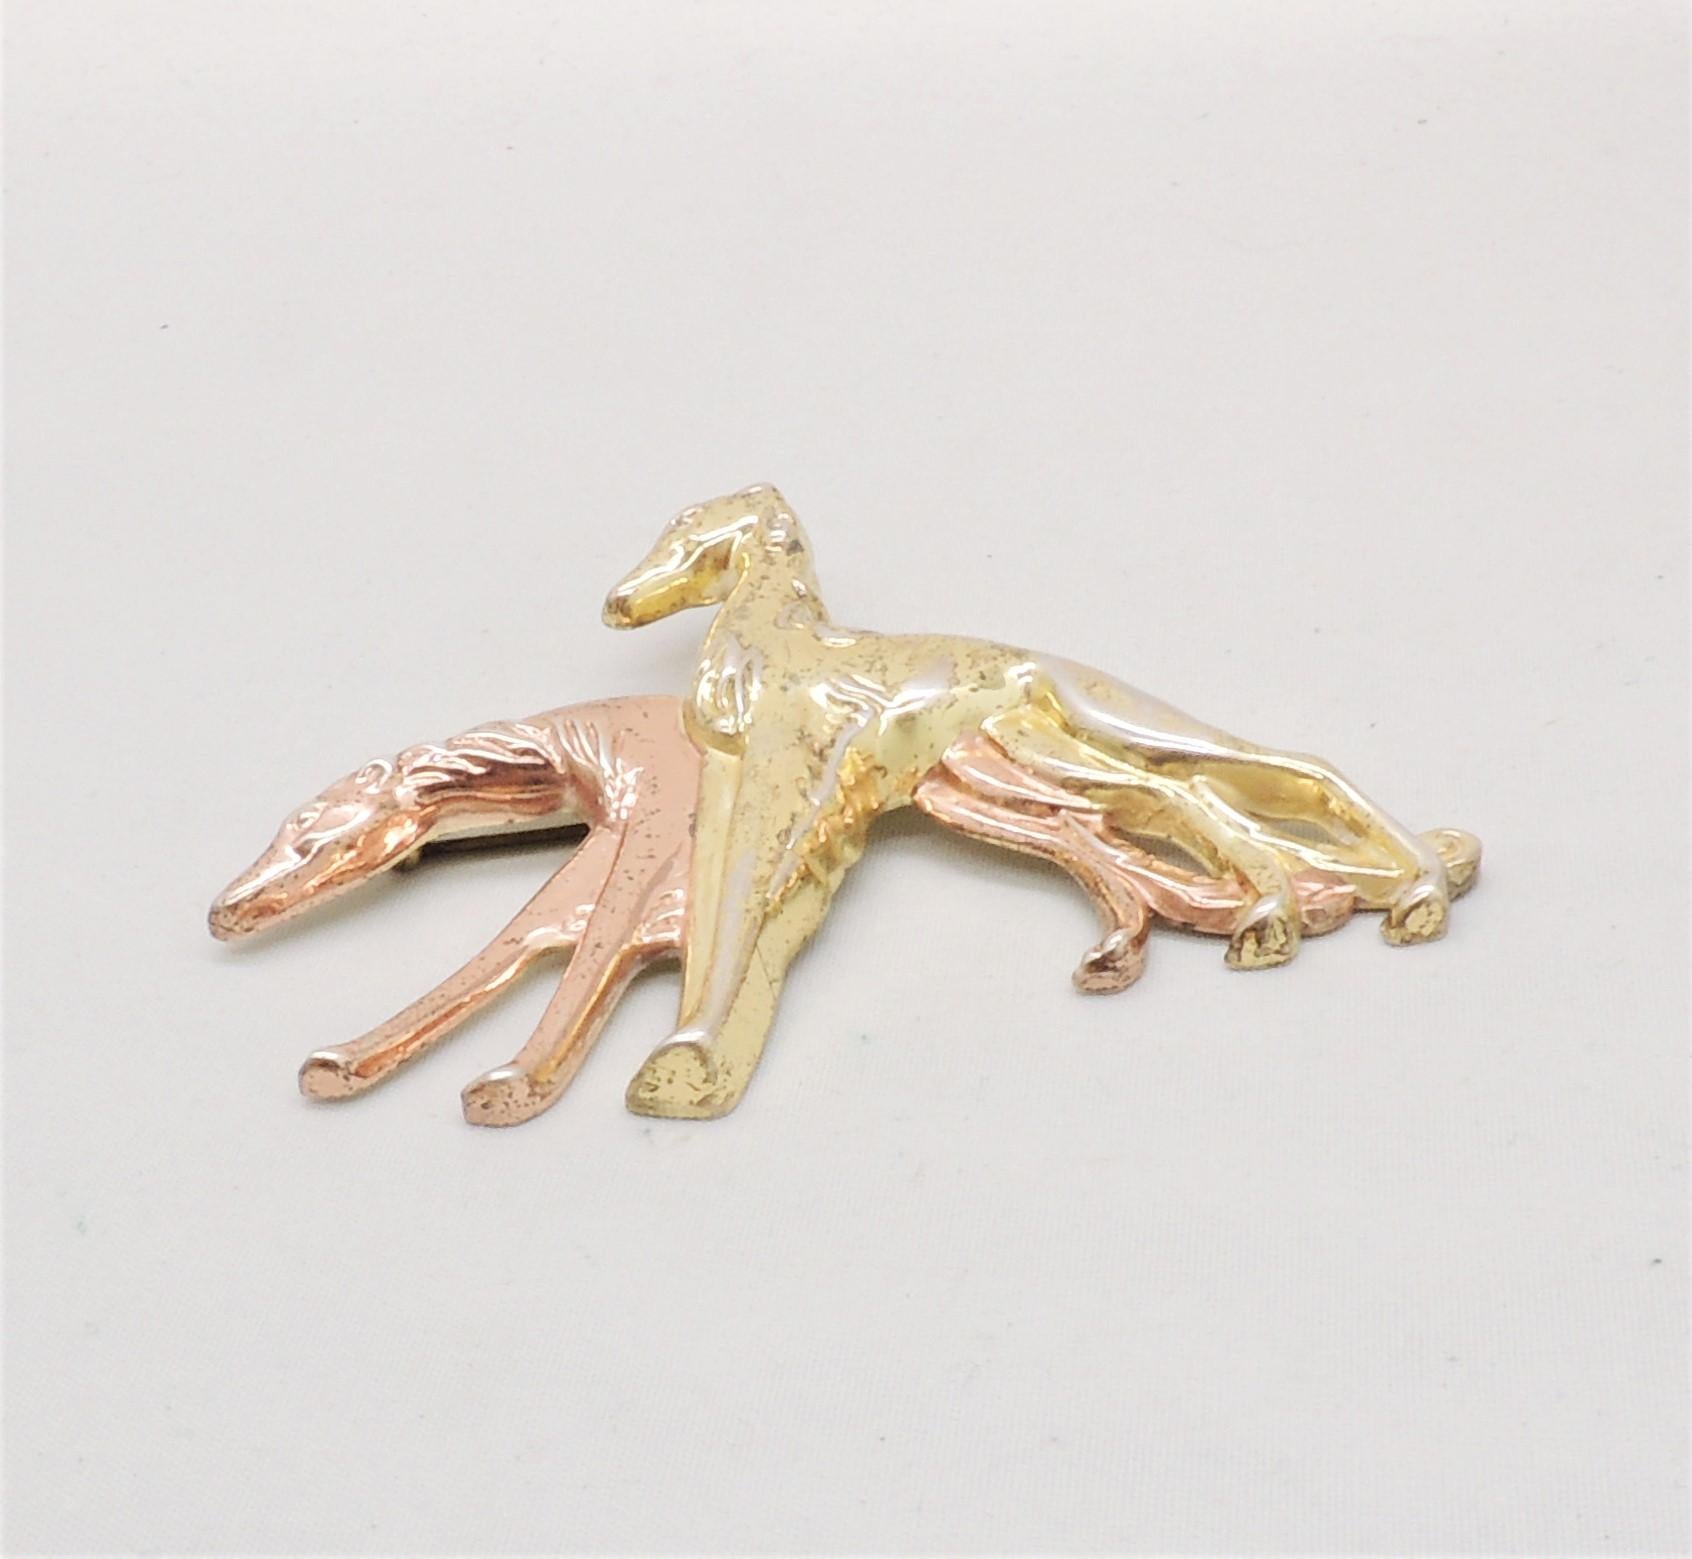 Rare 1940s sterling goldtone and pink gold plated two greyhounds brooch with security clasp. Marked 